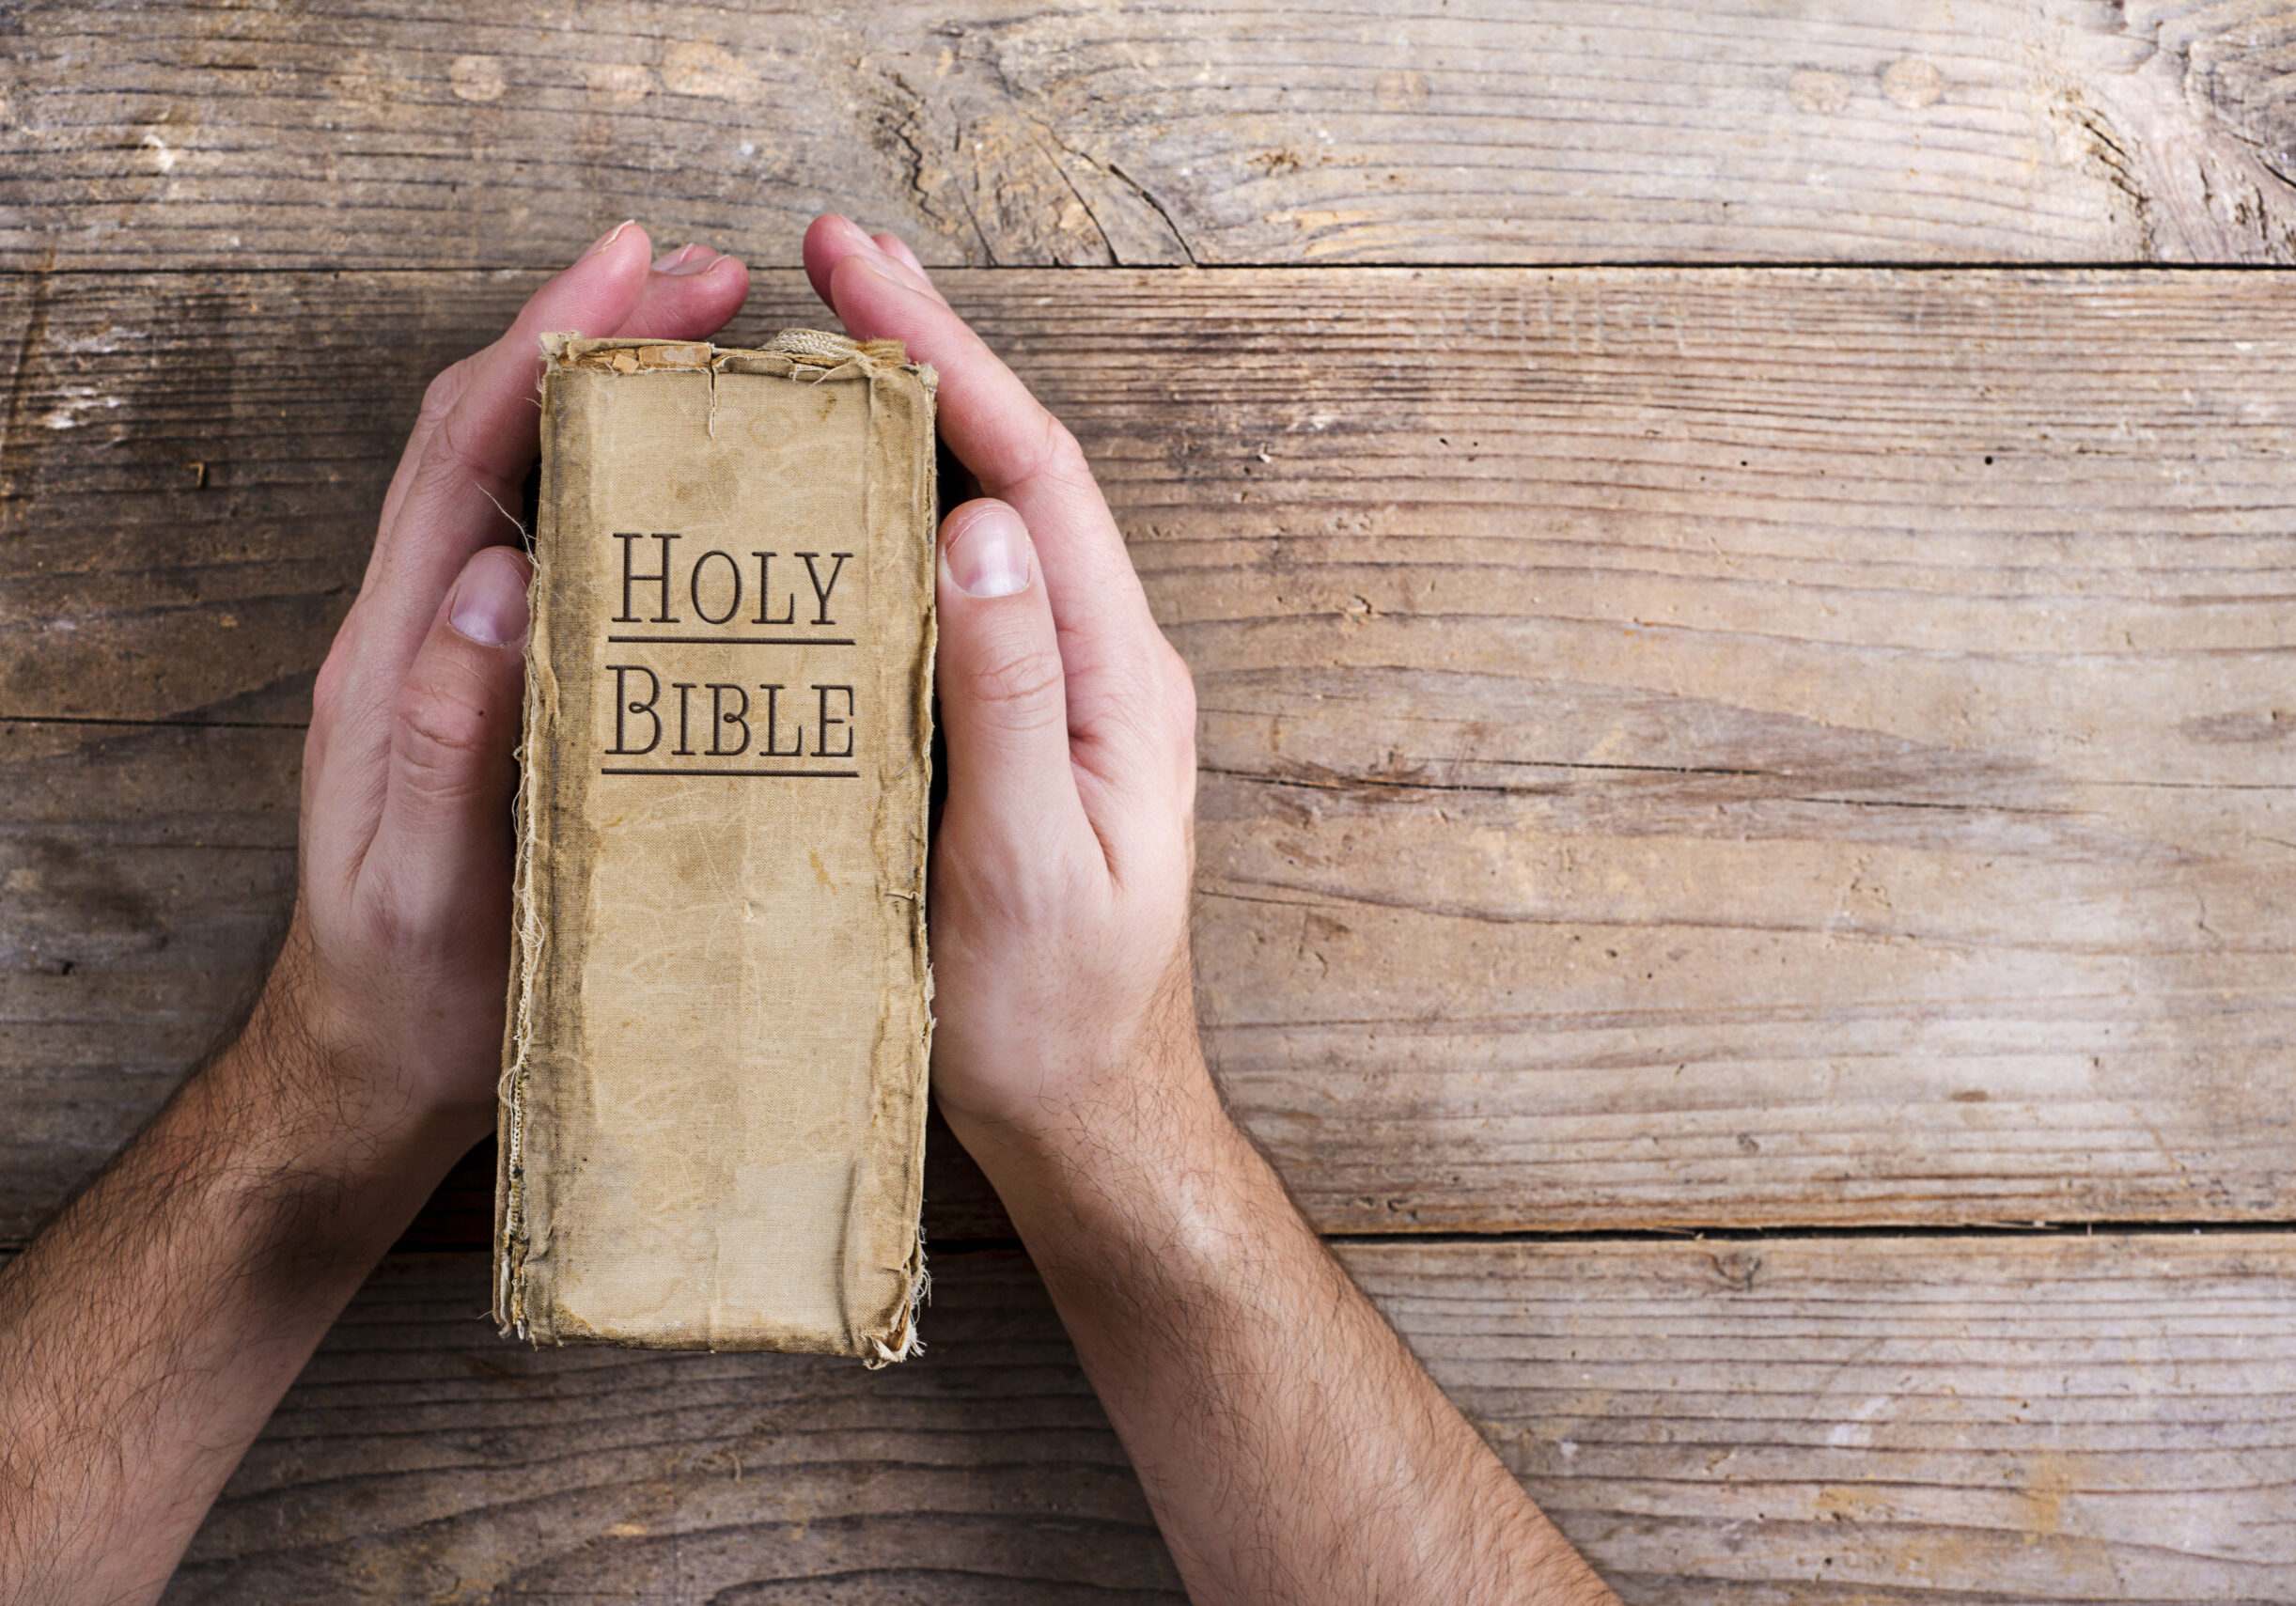 Hands holding Bible on a wooden desk background.